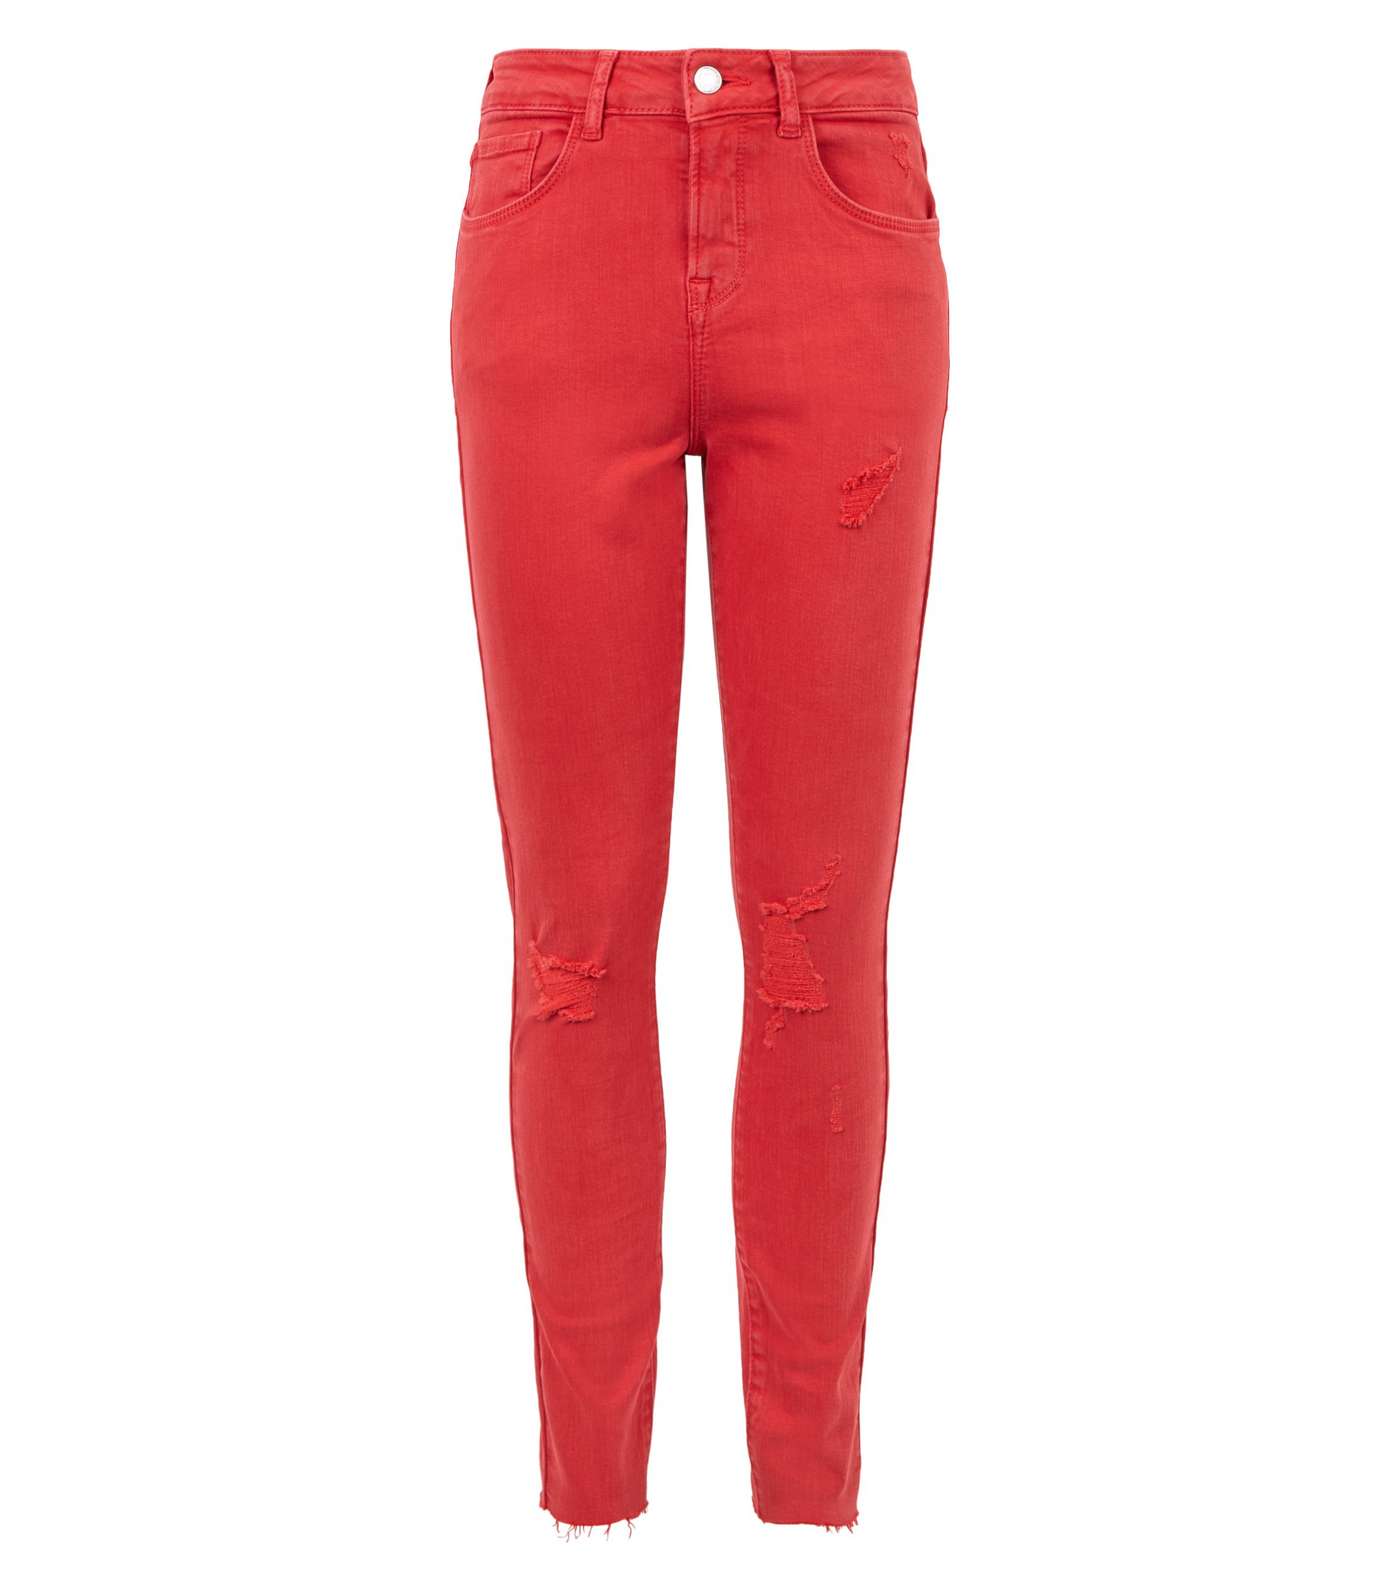 Girls Red Ripped Skinny Jeans  Image 4